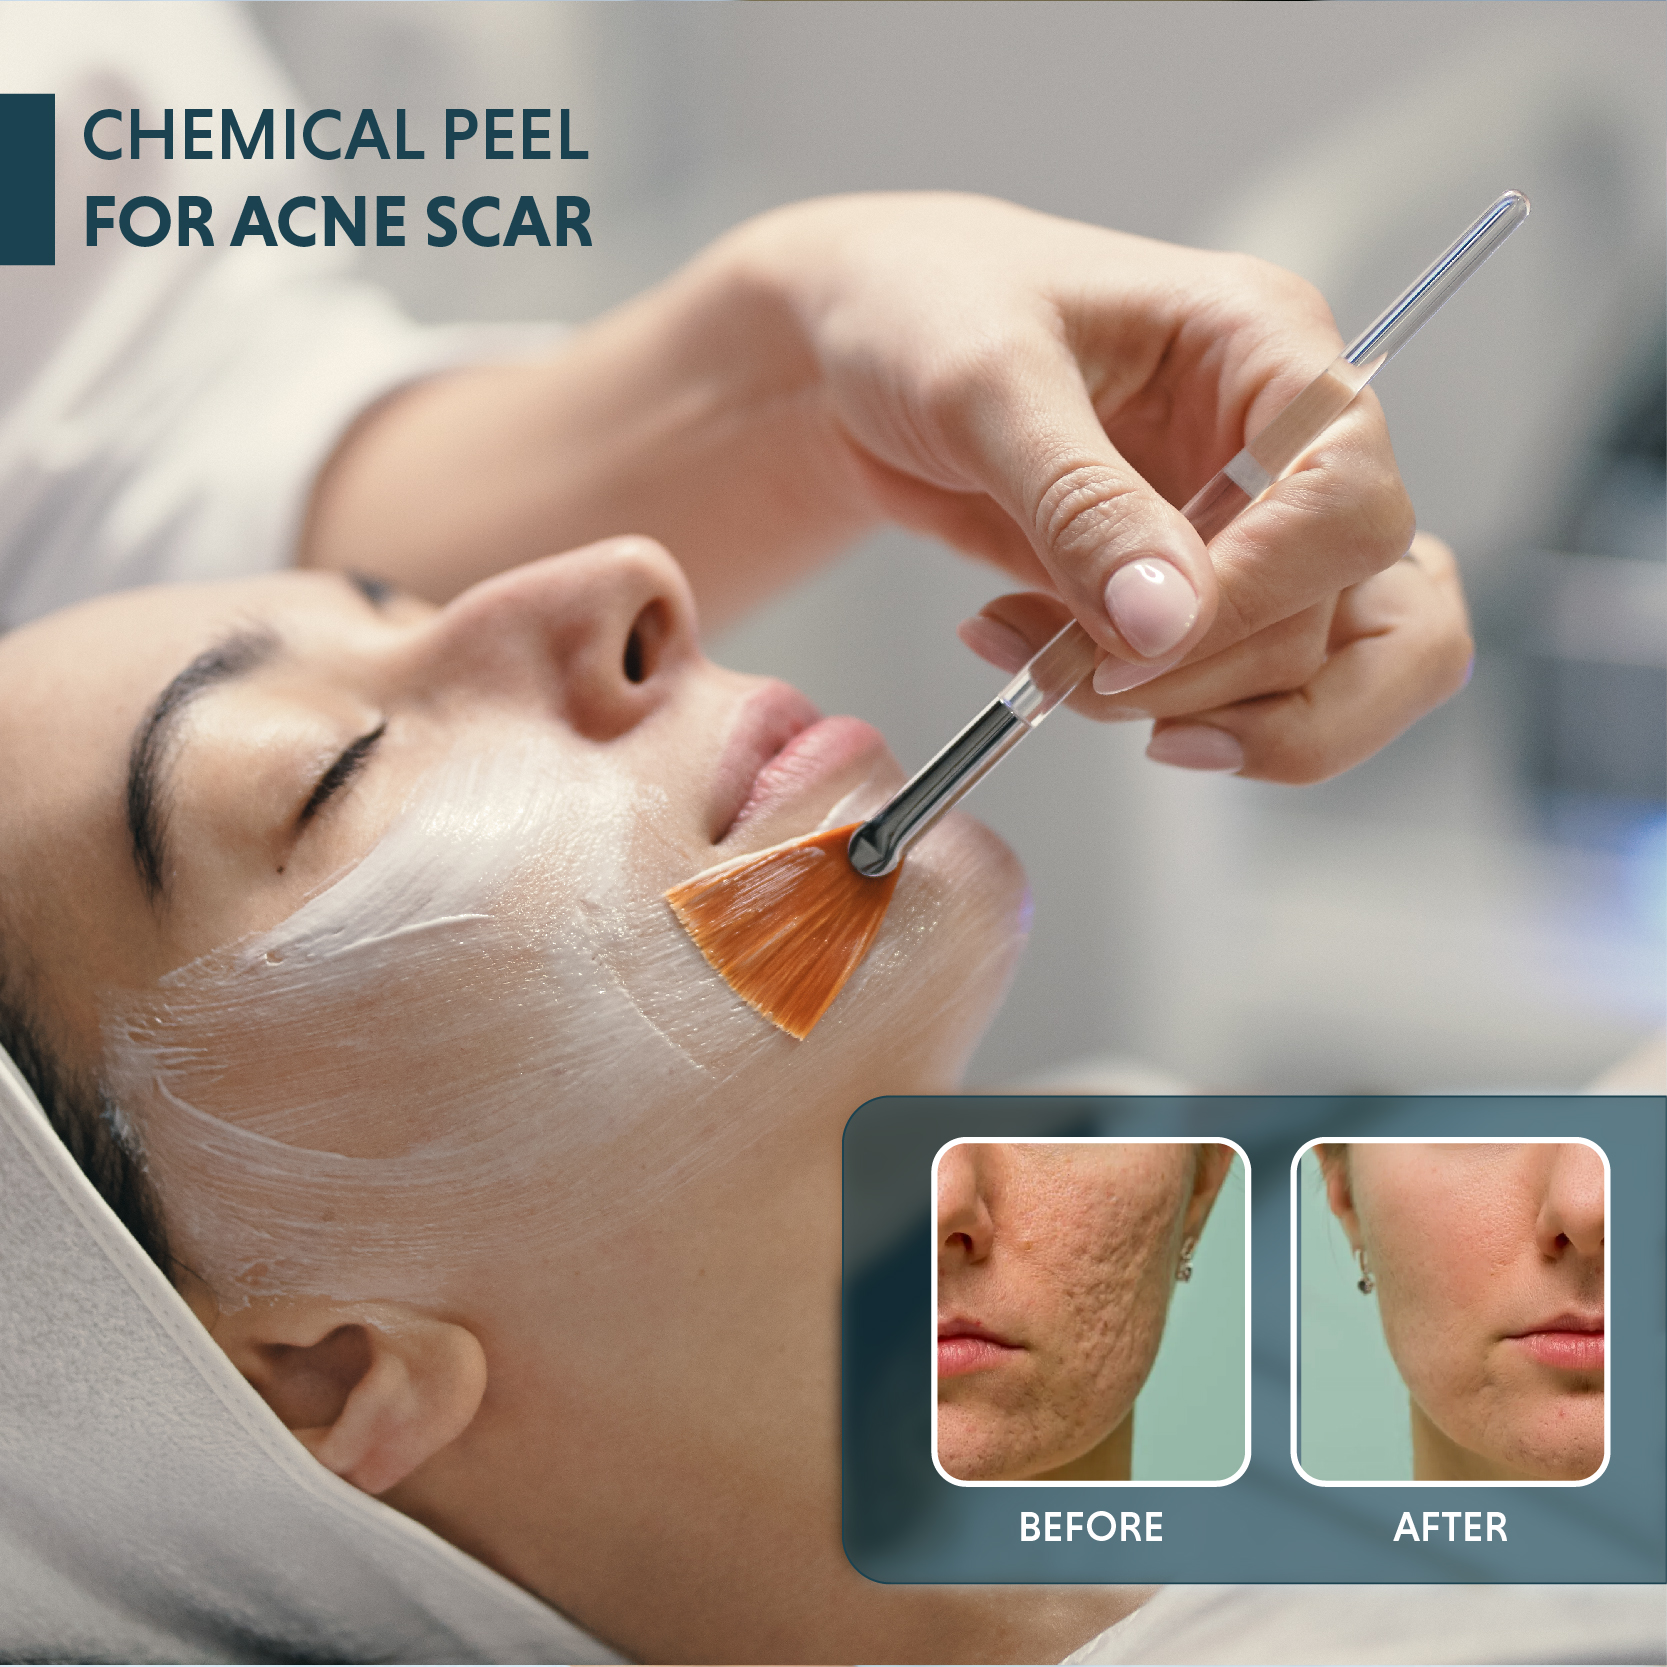 Chemical Peel For Acne Scars